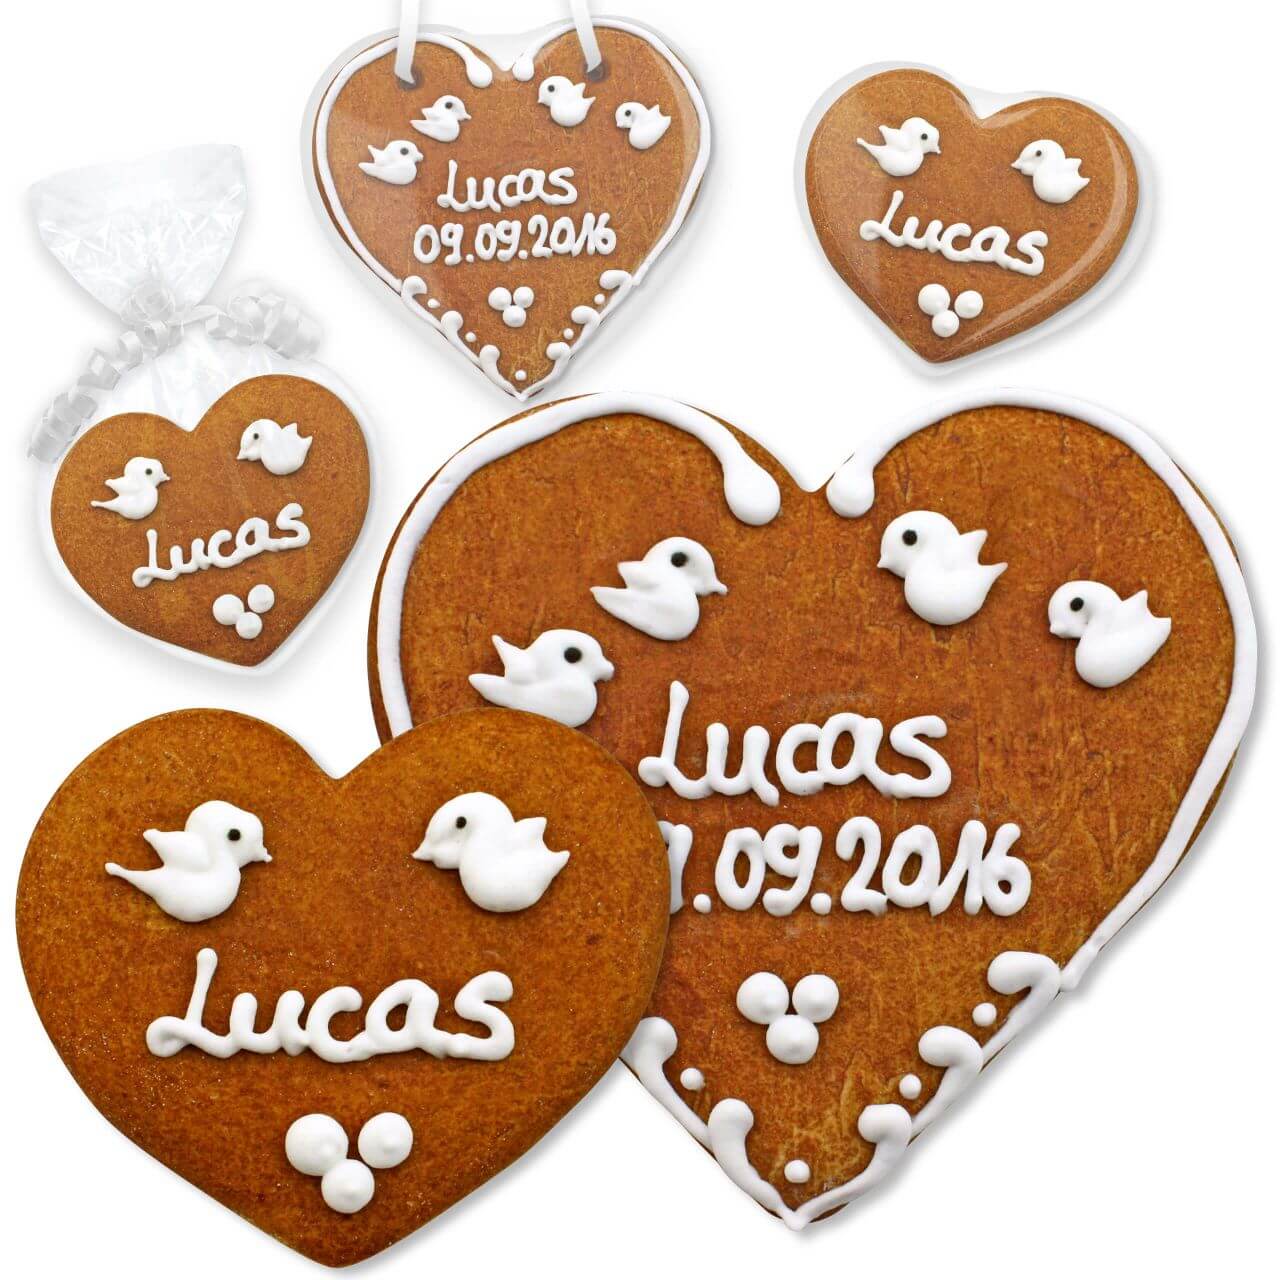 Gingerbread heart name card for wedding